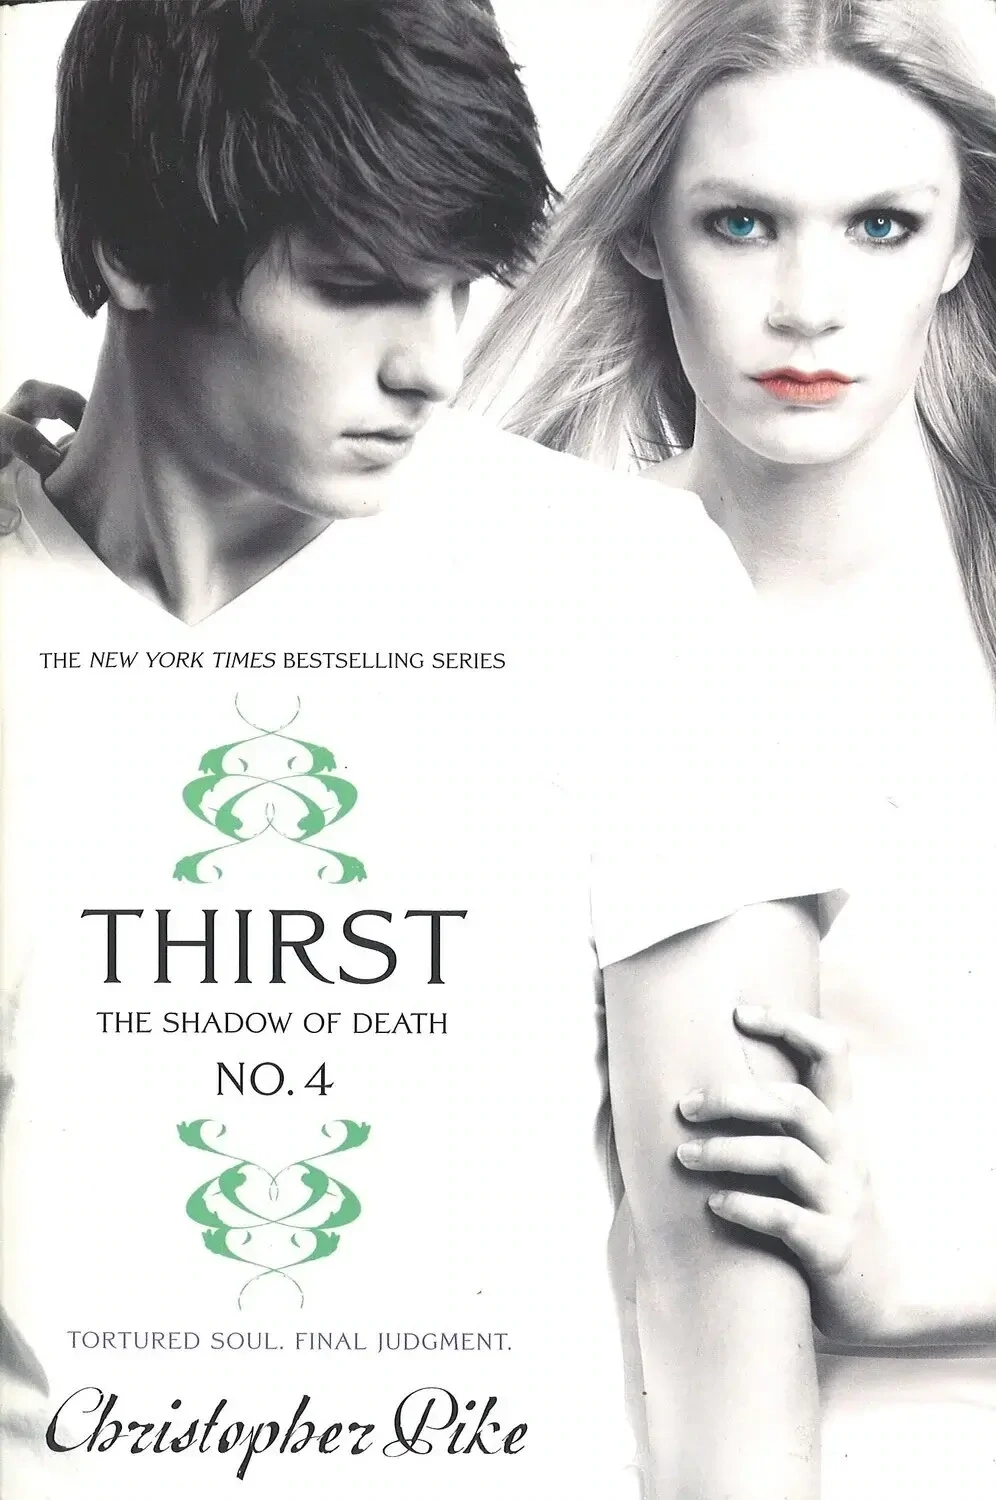 Thirst No. 4: The Shadow of Death, Christopher Pike